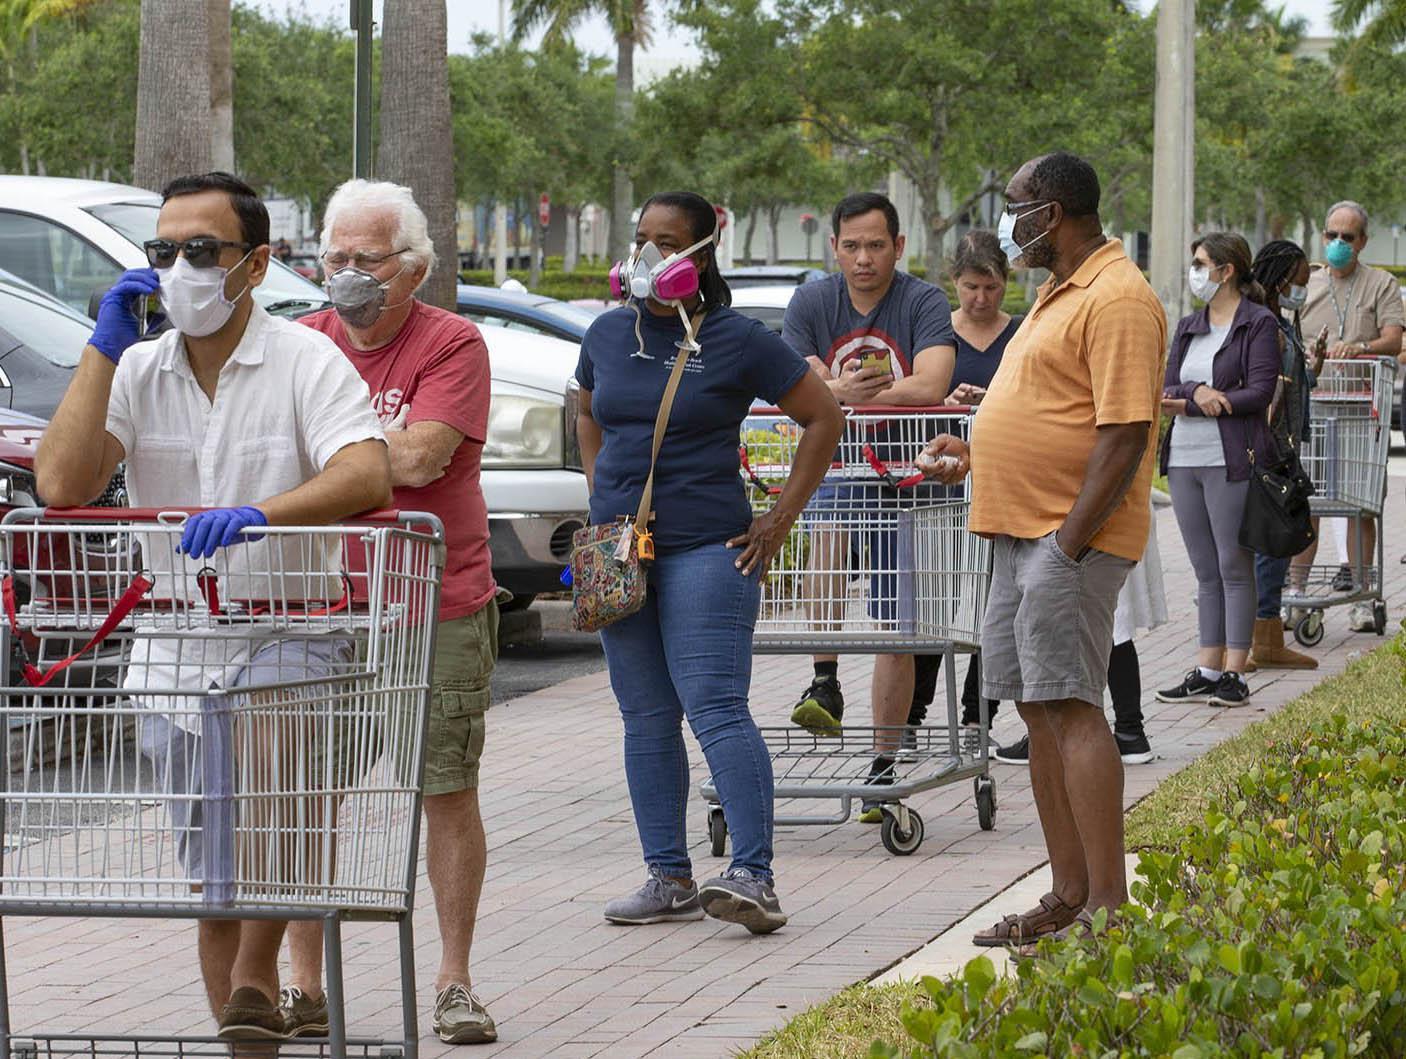 Seven out of nine customers in a long line outside Costco, wear protective masks, Friday in Royal Palm Beach. The discount wholesaler had supplies of toilet paper, paper towels, tissues, chicken, eggs and milk, but no hand sanitizer. [ALLEN EYESTONE/palmbeachpost.com]